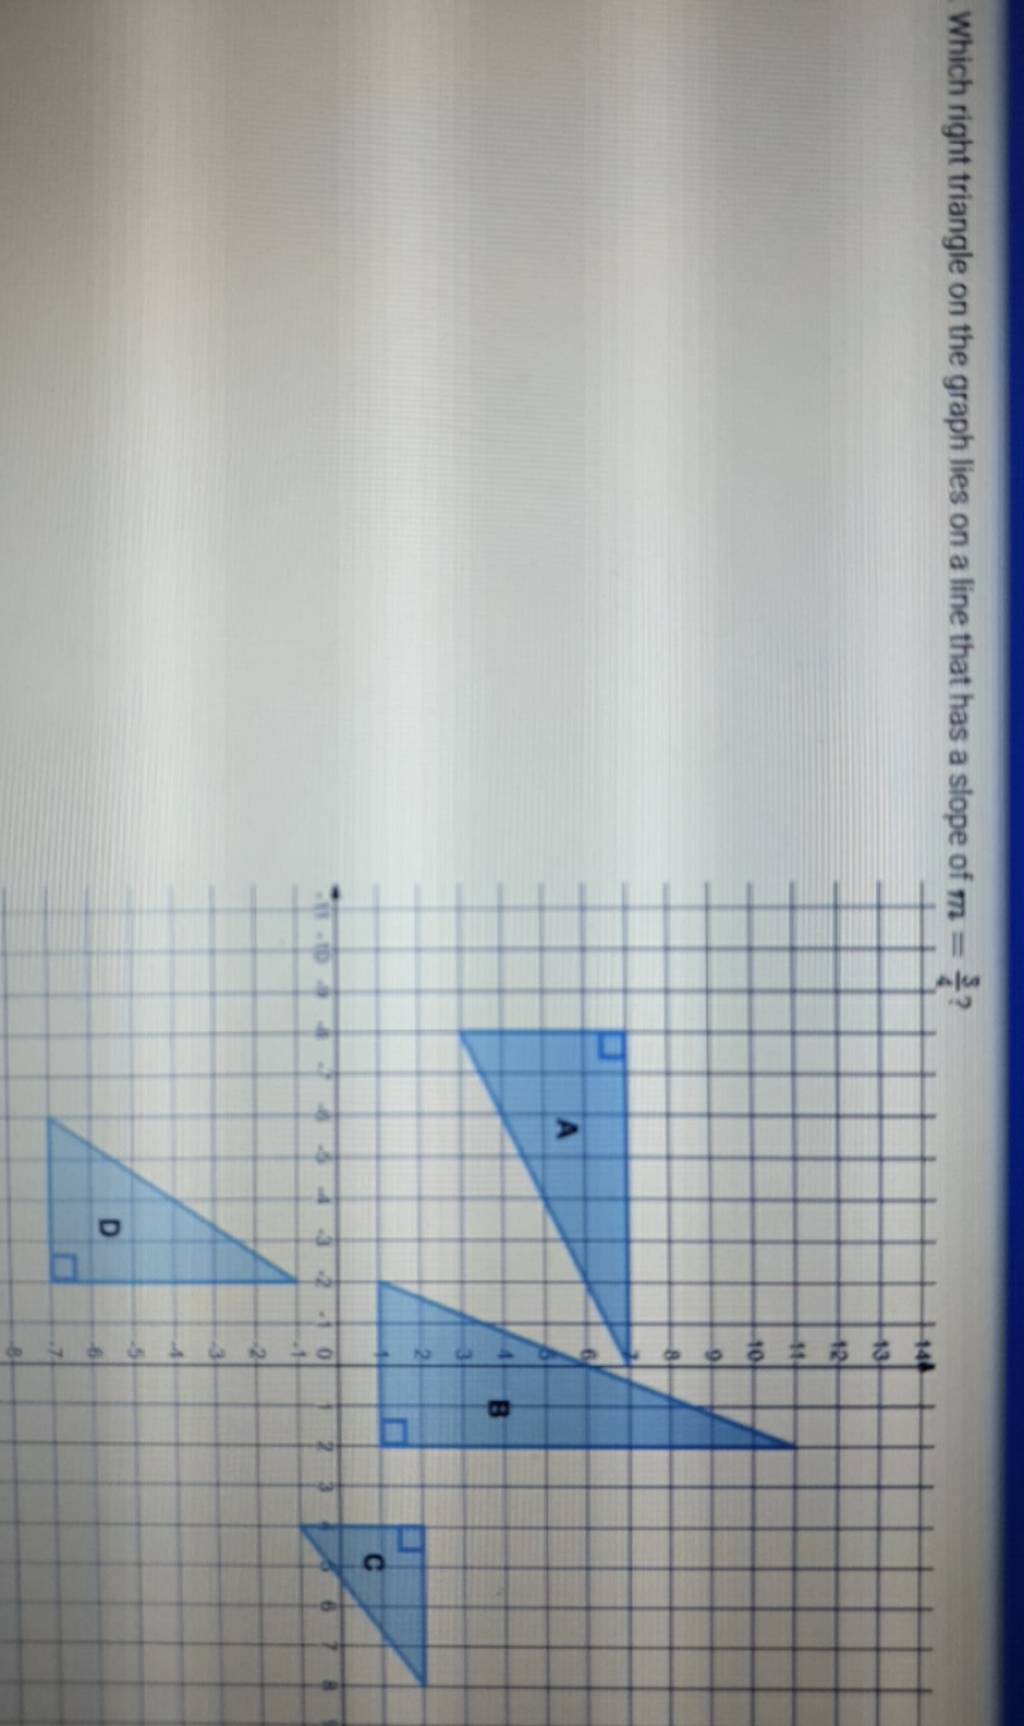 Which right triangle on the graph lies on a line that has a slope of m